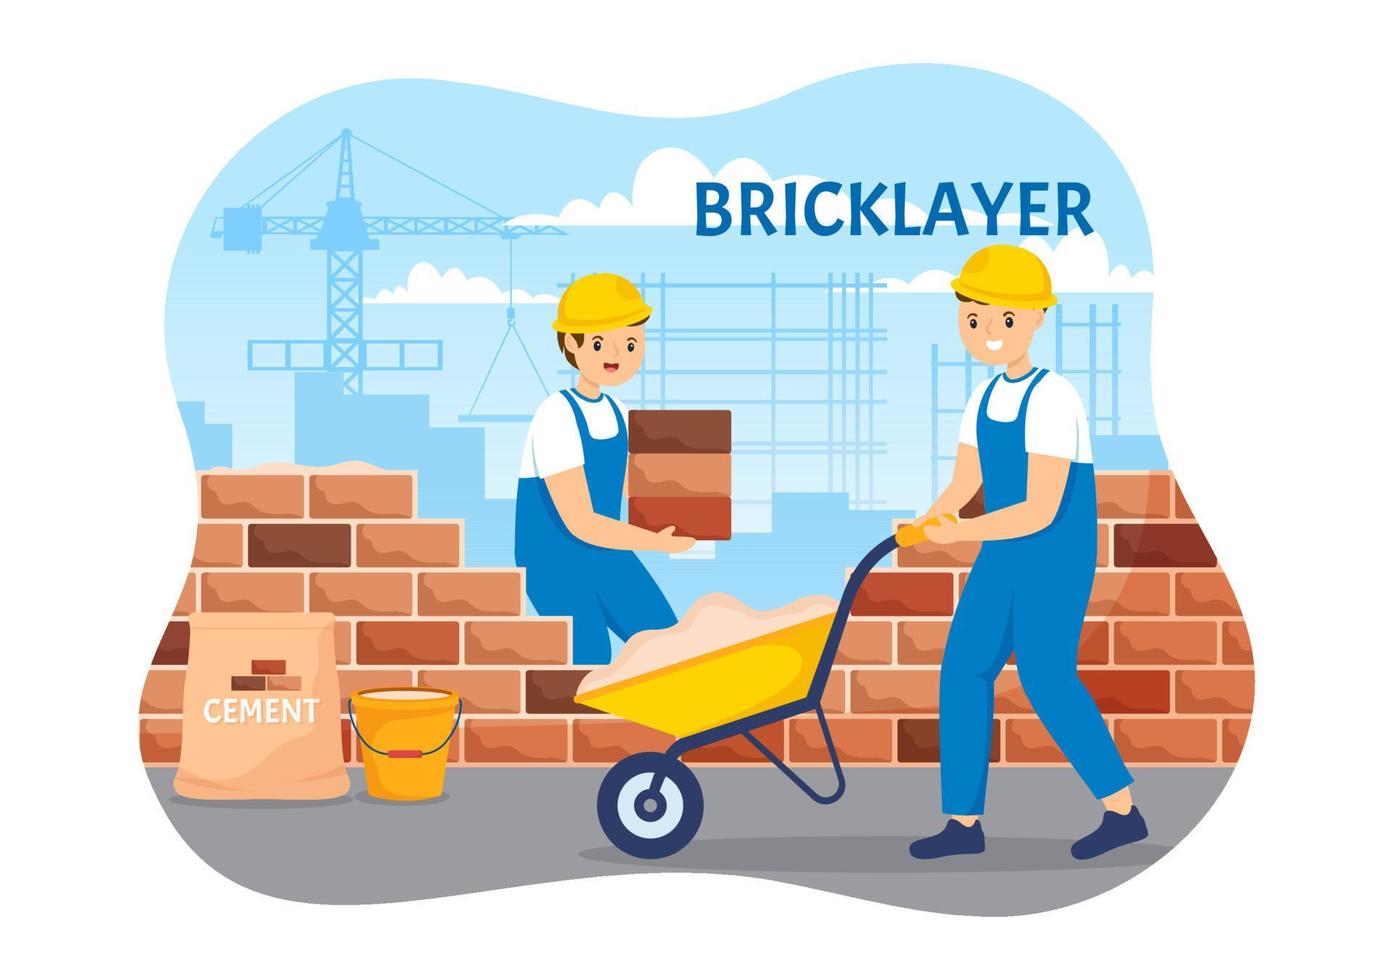 Bricklayer Worker Illustration with People Construction and Laying Bricks for Building a Wall in Flat Cartoon Hand Drawn Landing Page Templates vector